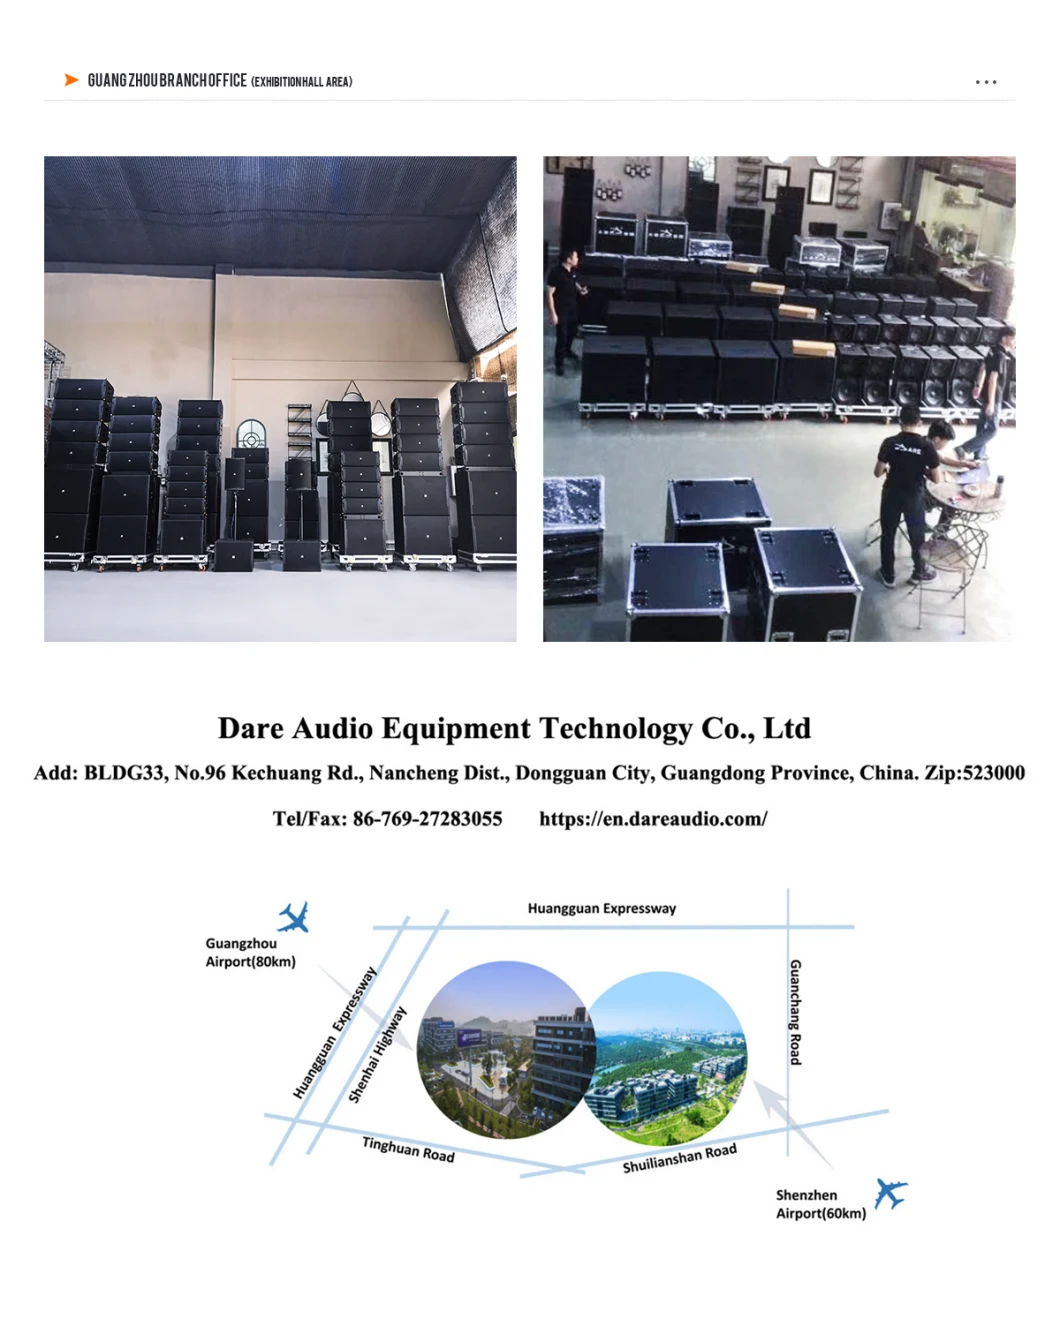 Single 10 Inch Top Line Array Passive Audio Speaker PA System Suited to 500-1500 People